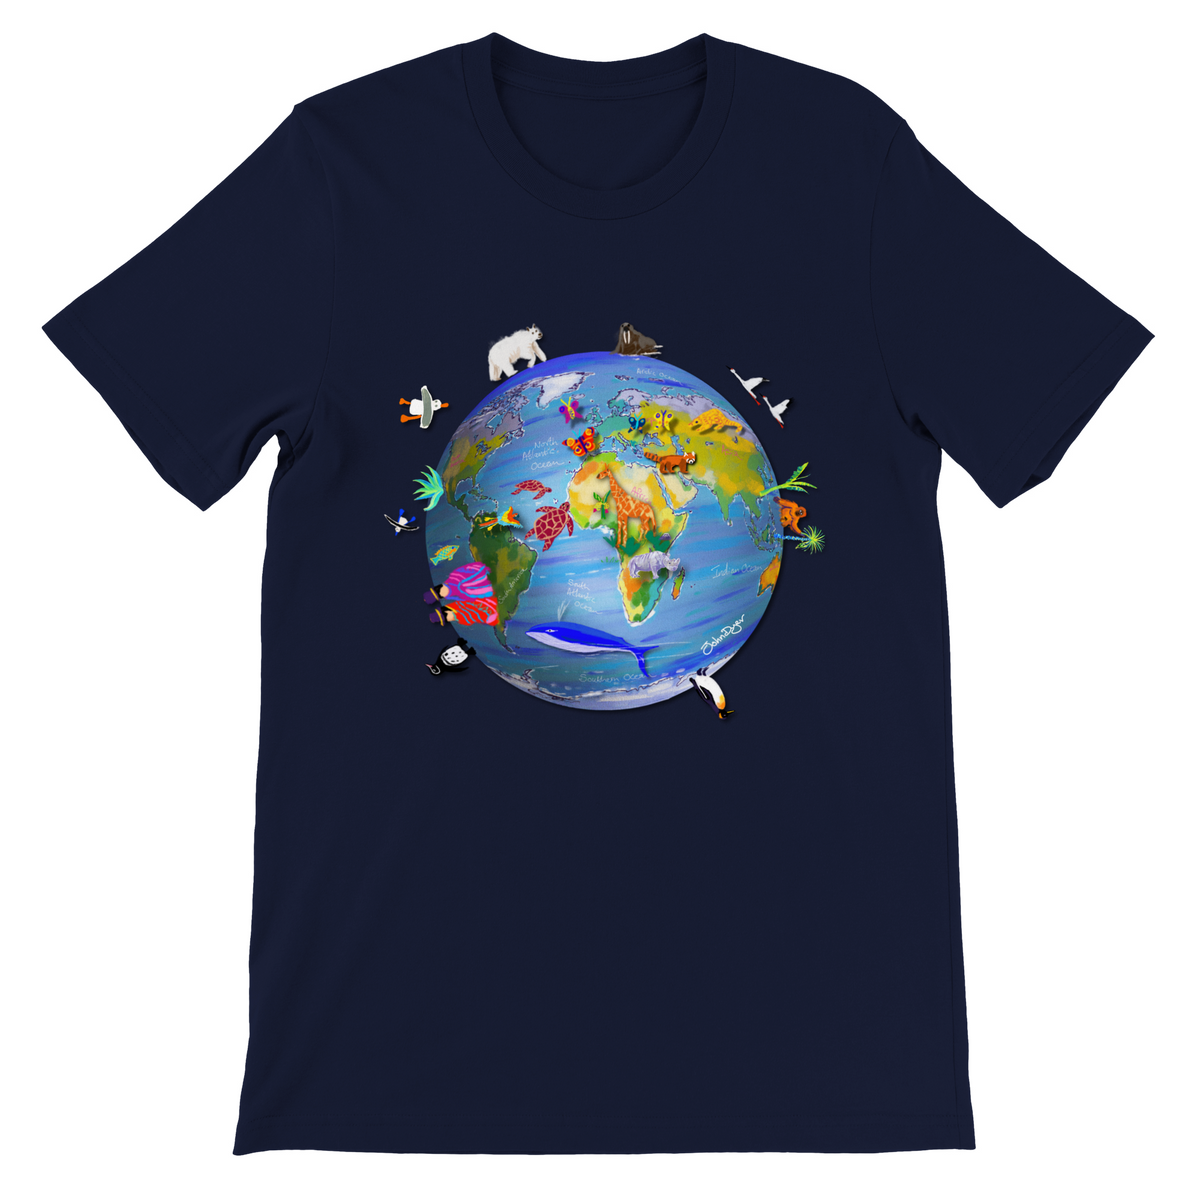 Blue Earth T-Shirt featuring art from John Dyer of planet earth, climate change and wildlife. This fantastic art earth t-shirt features a drawing of planet earth with endangered animals and environments. Unisex and eco-friendly. Free worldwide delivery.